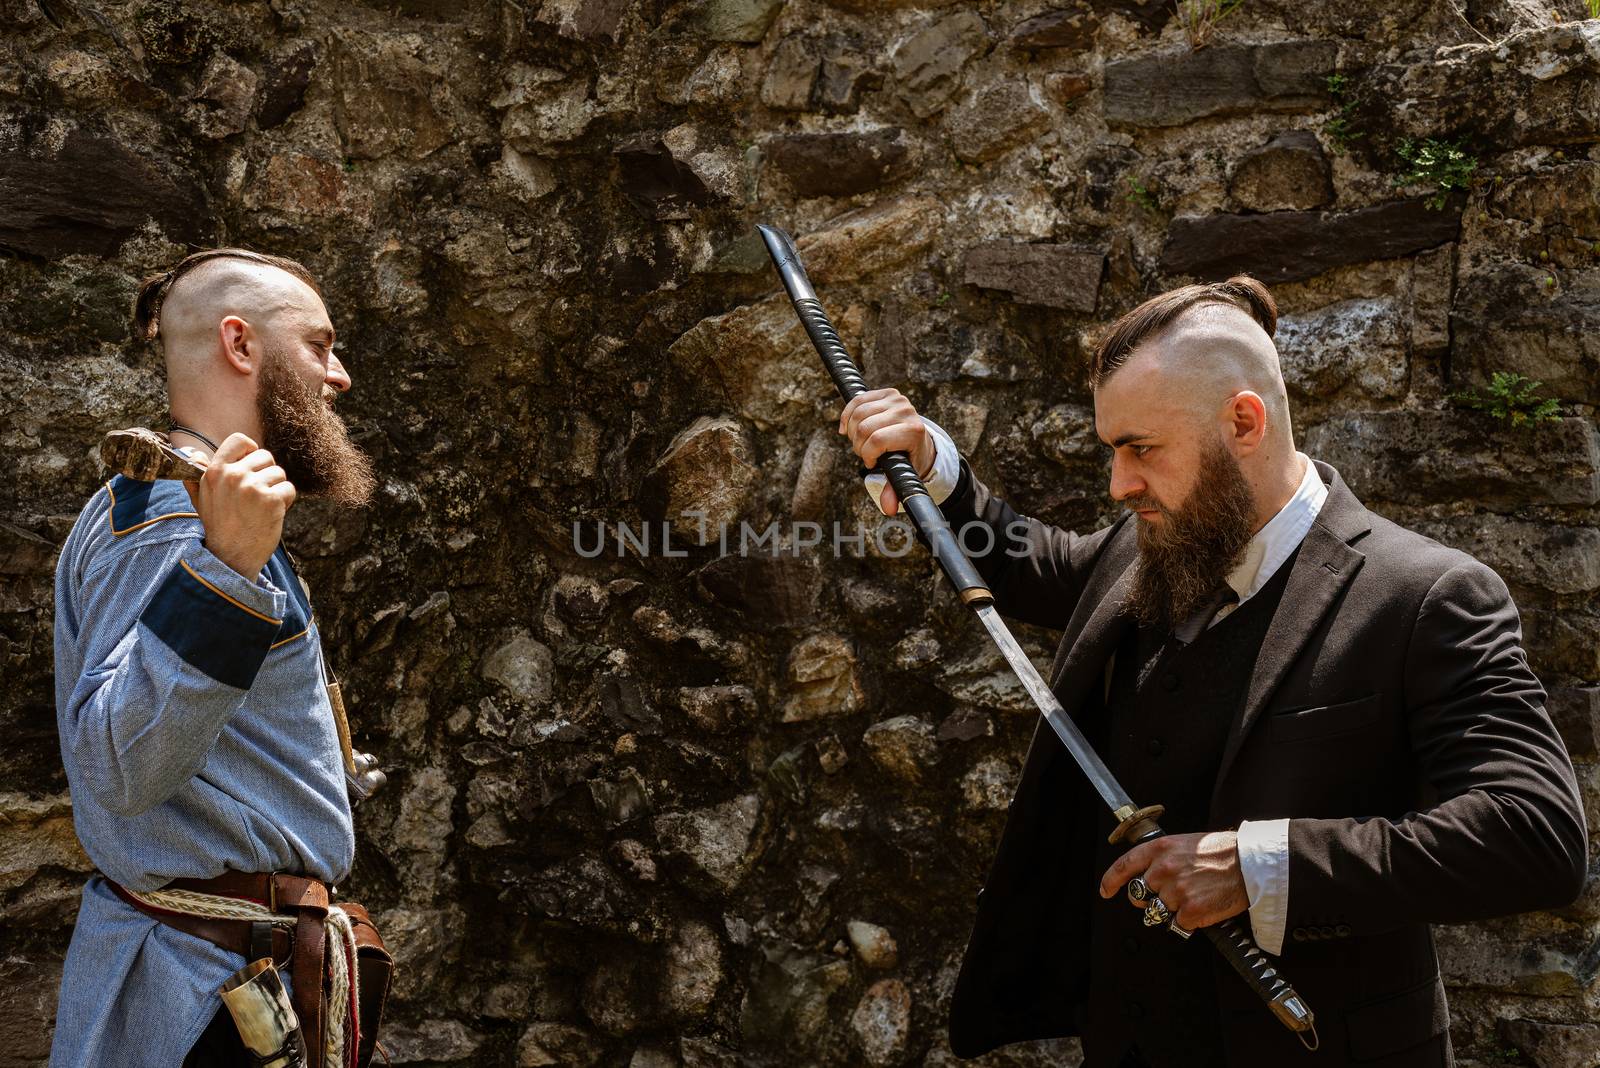 A man in Viking clothes derides his alter ego which challenges him by brandishing a katana in contemporary clothes, the same man face to face in clothes from different eras